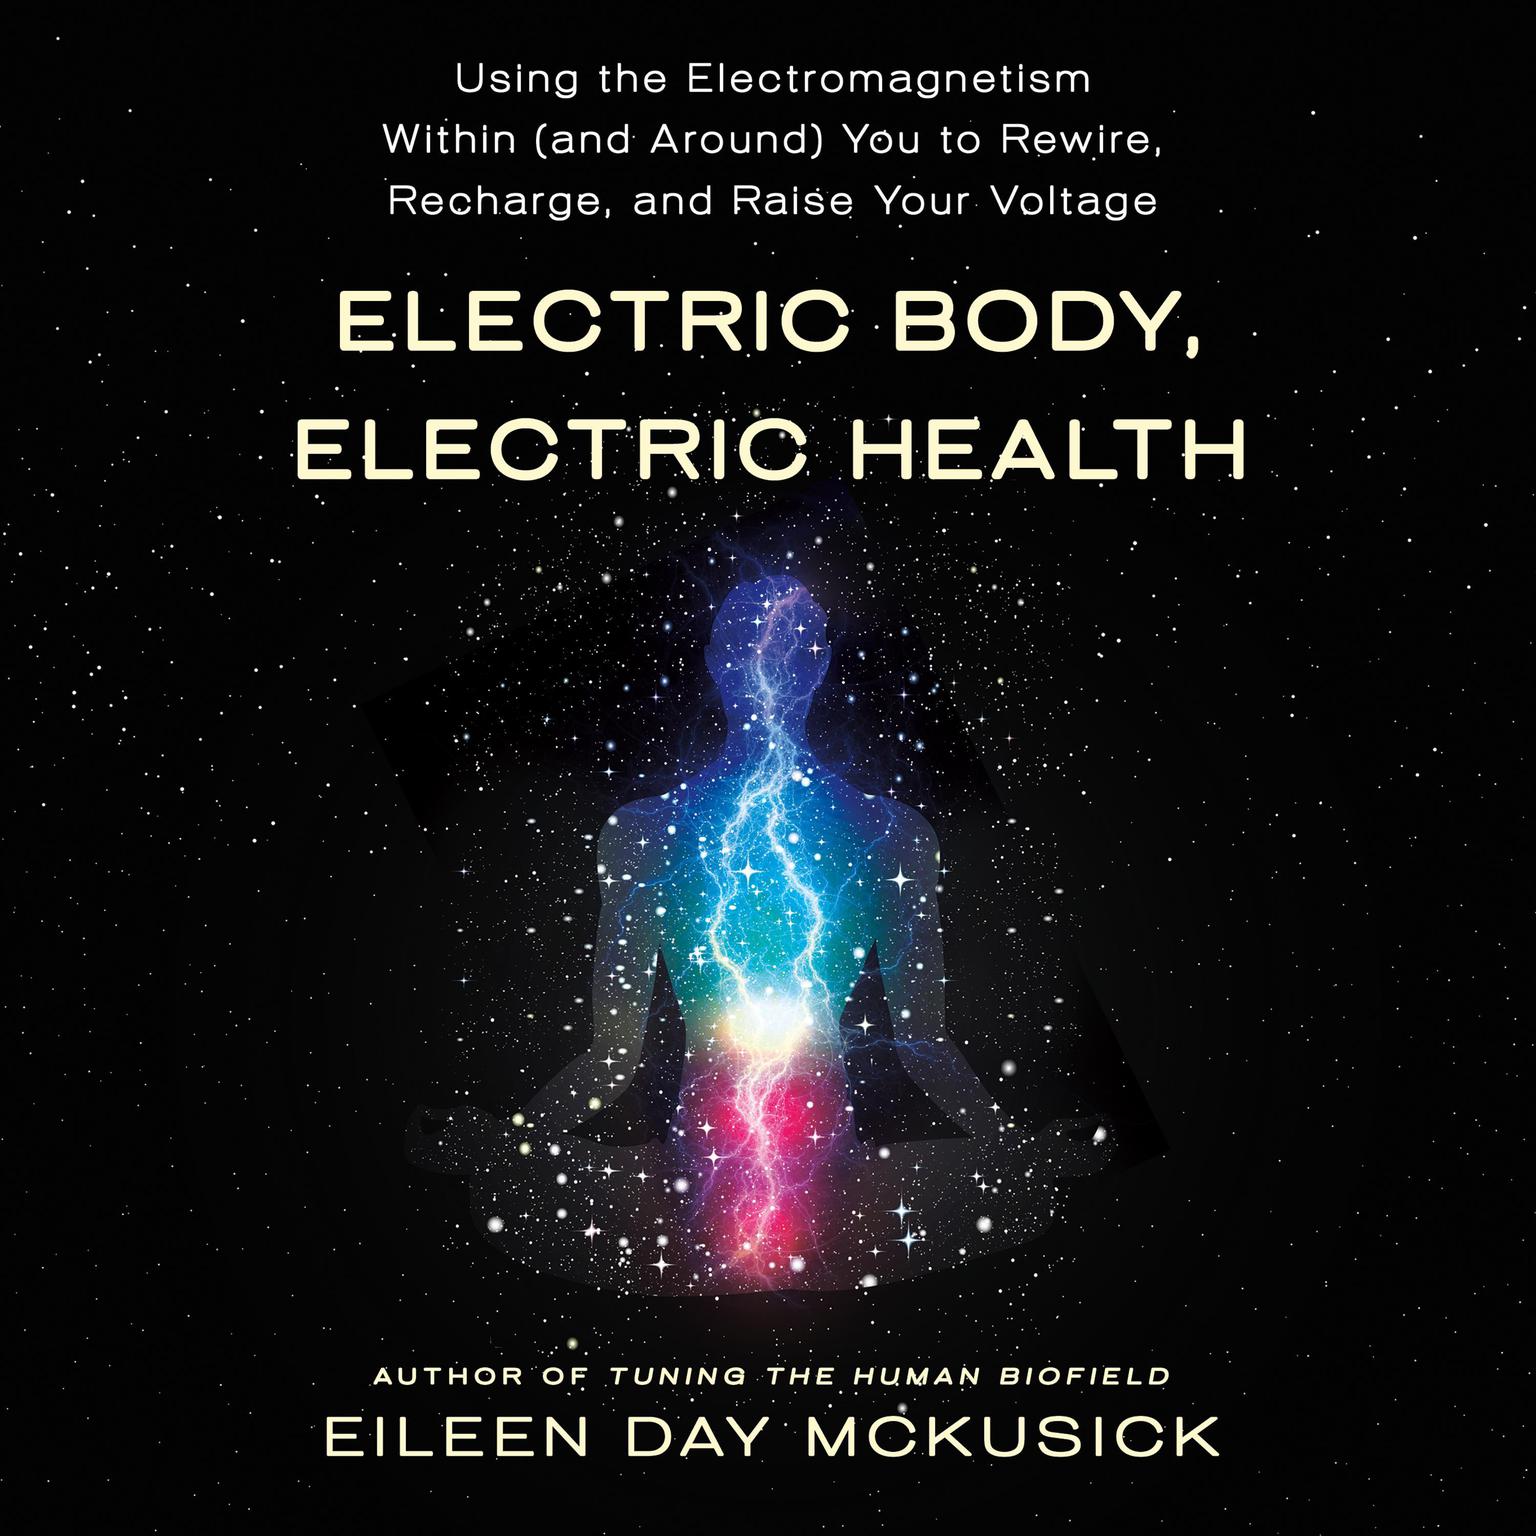 Electric Body, Electric Health: Using the Electromagnetism Within (and Around) You to Rewire, Recharge, and Raise Your Voltage Audiobook, by Eileen Day McKusick